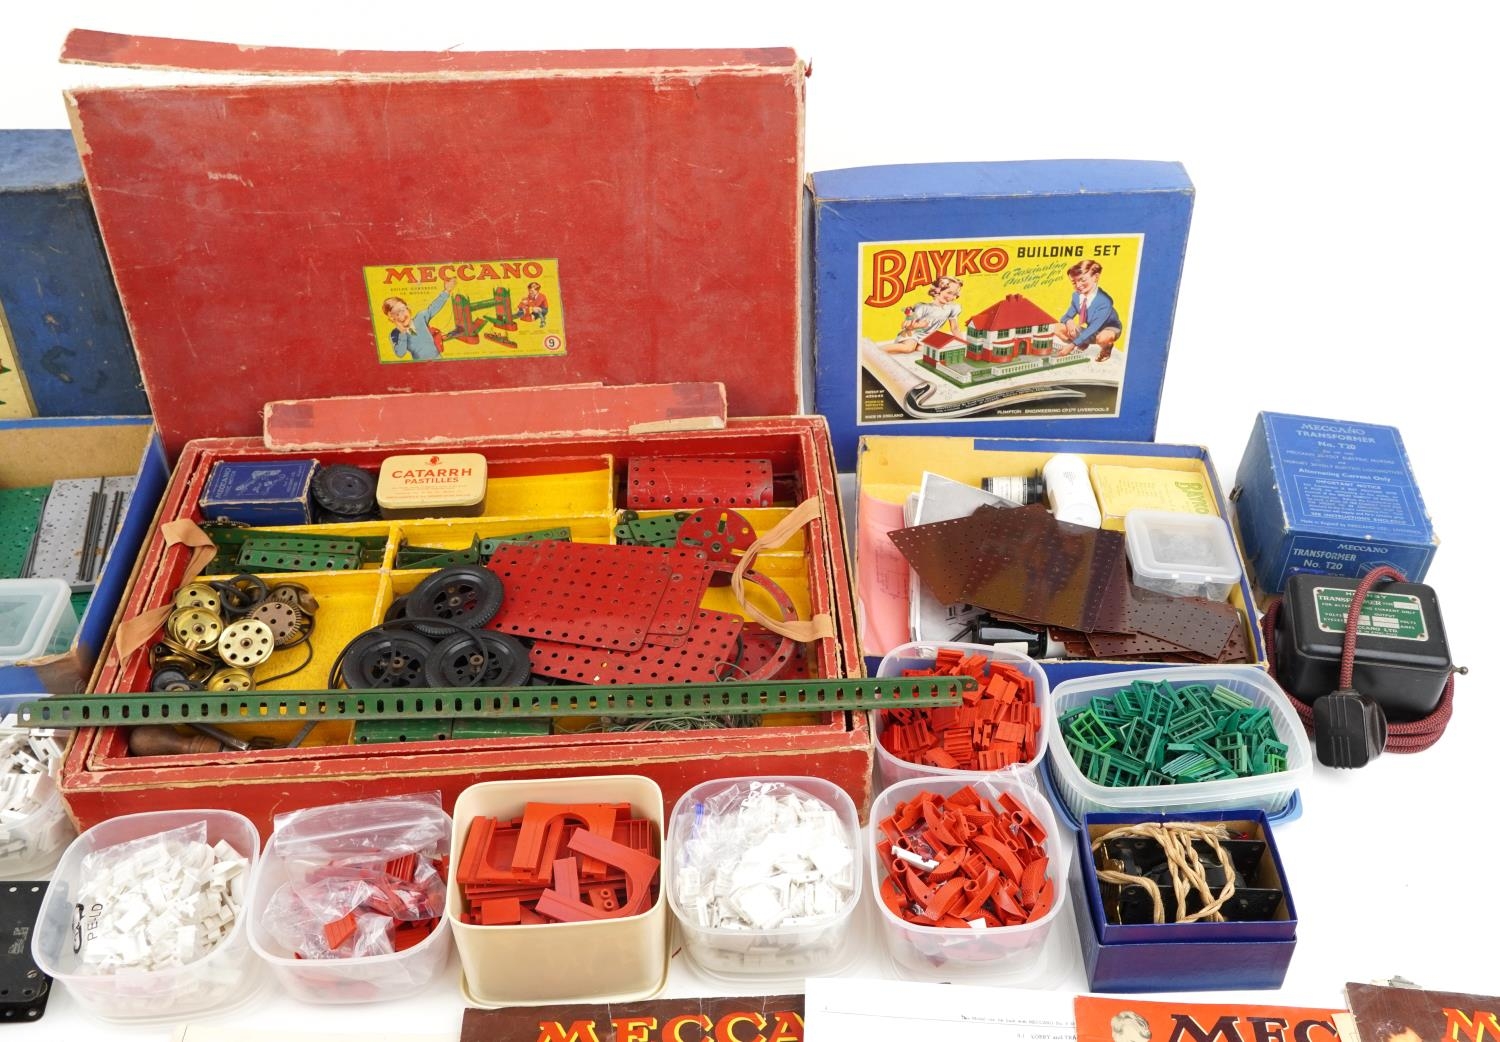 Large collection of vintage Meccano and Bayko construction toys including Bayko No 3 Building set, - Image 3 of 5